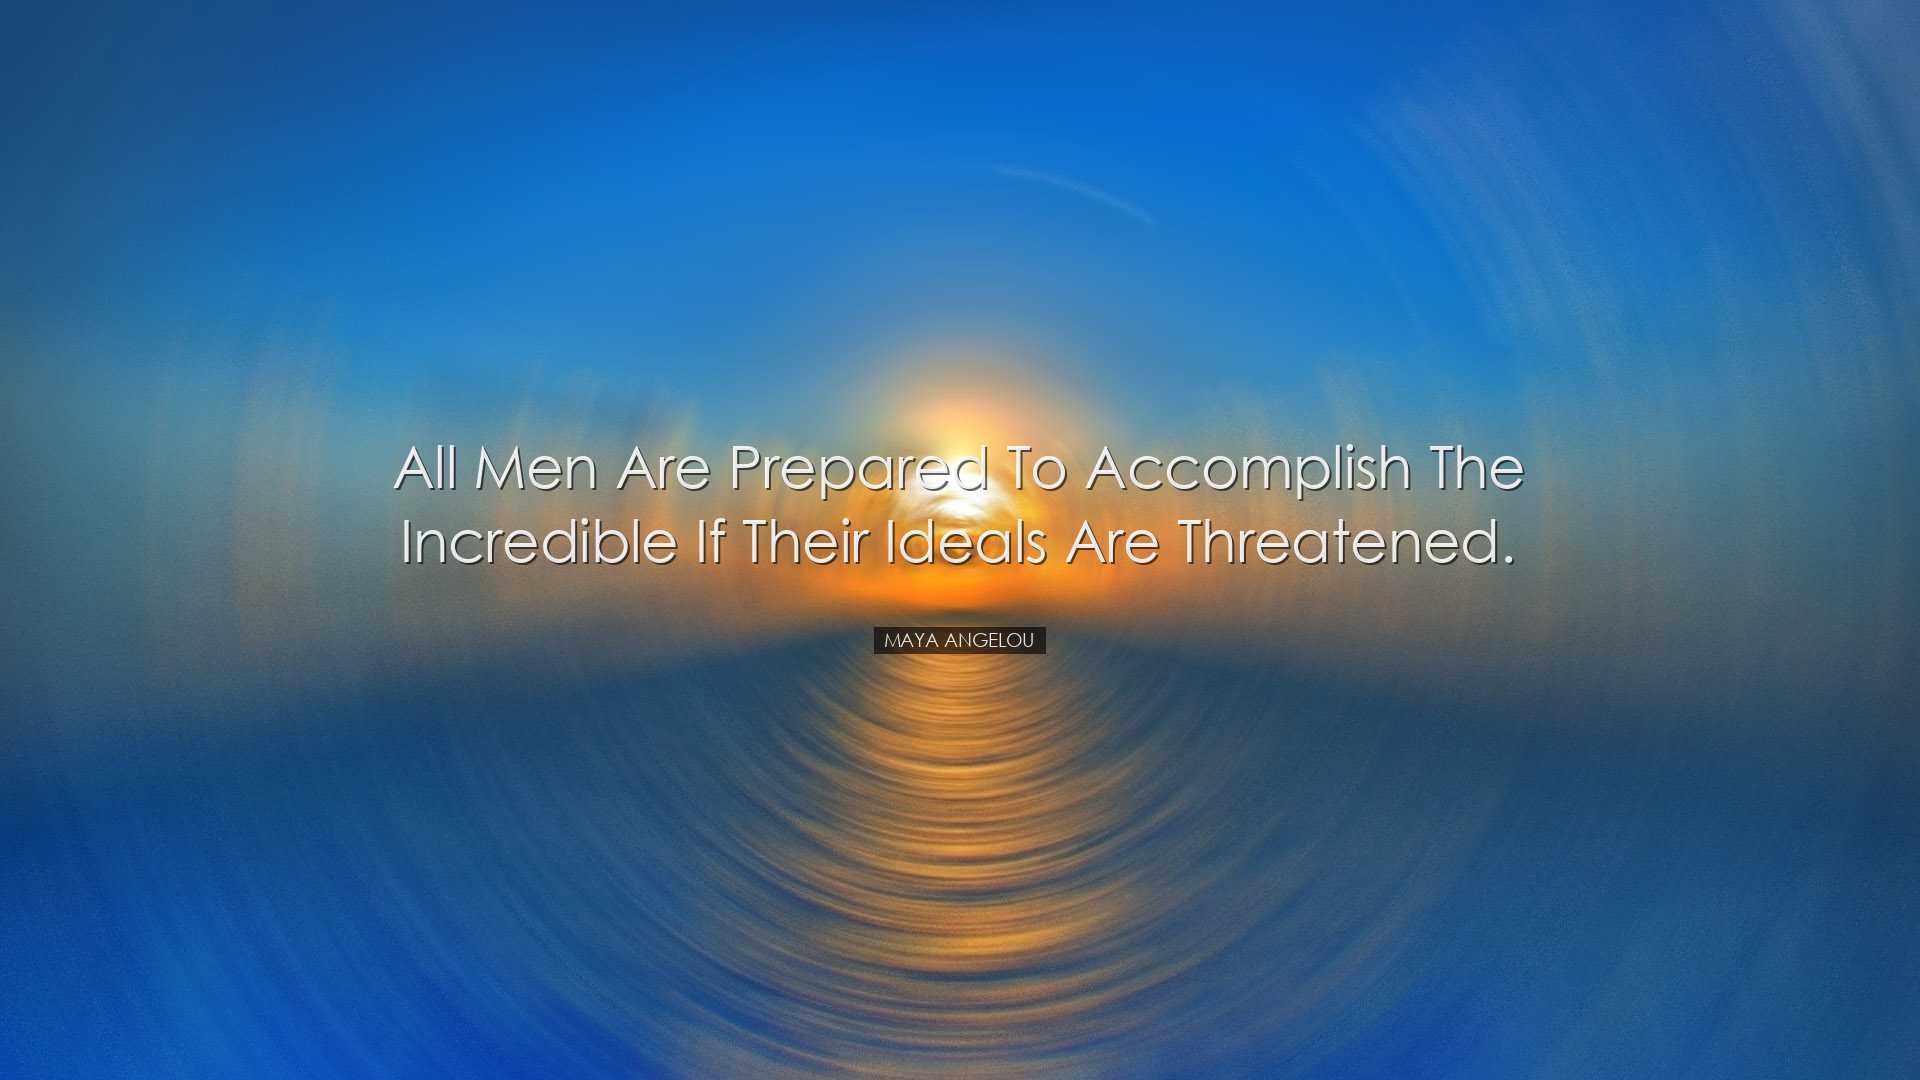 All men are prepared to accomplish the incredible if their ideals